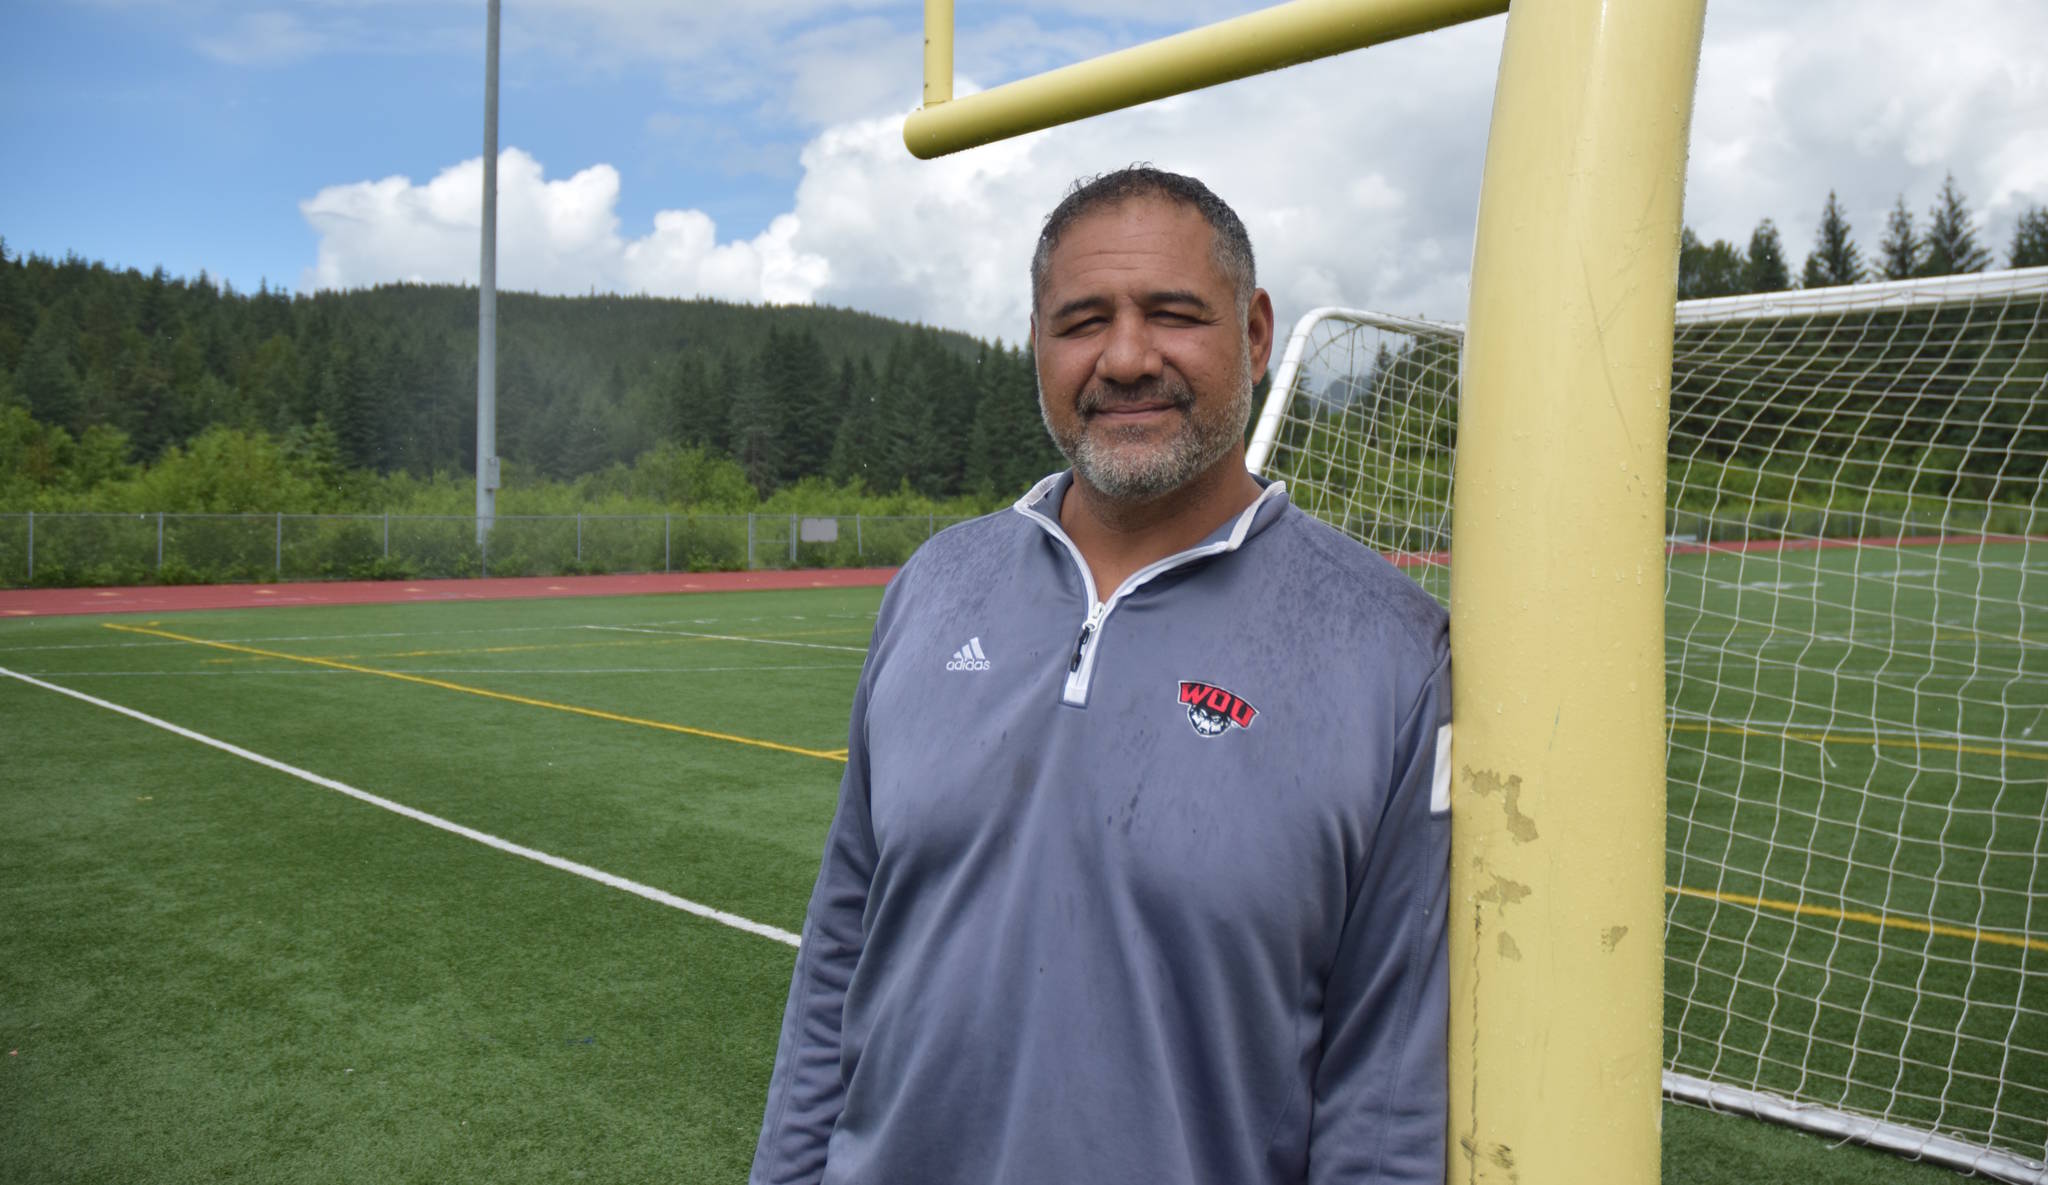 Kimo von Oelhoffen, 46, shown at the Thunder Mountain High School turf field Thursday, June 22. von Oelhoffen visited Juneau with Western Oregon University athletics colleague Cori Metzgar in preparation for the Juneau Football and Sports Performance Camp coming to town July 10-14. (Nolin Ainsworth | Juneau Empire)